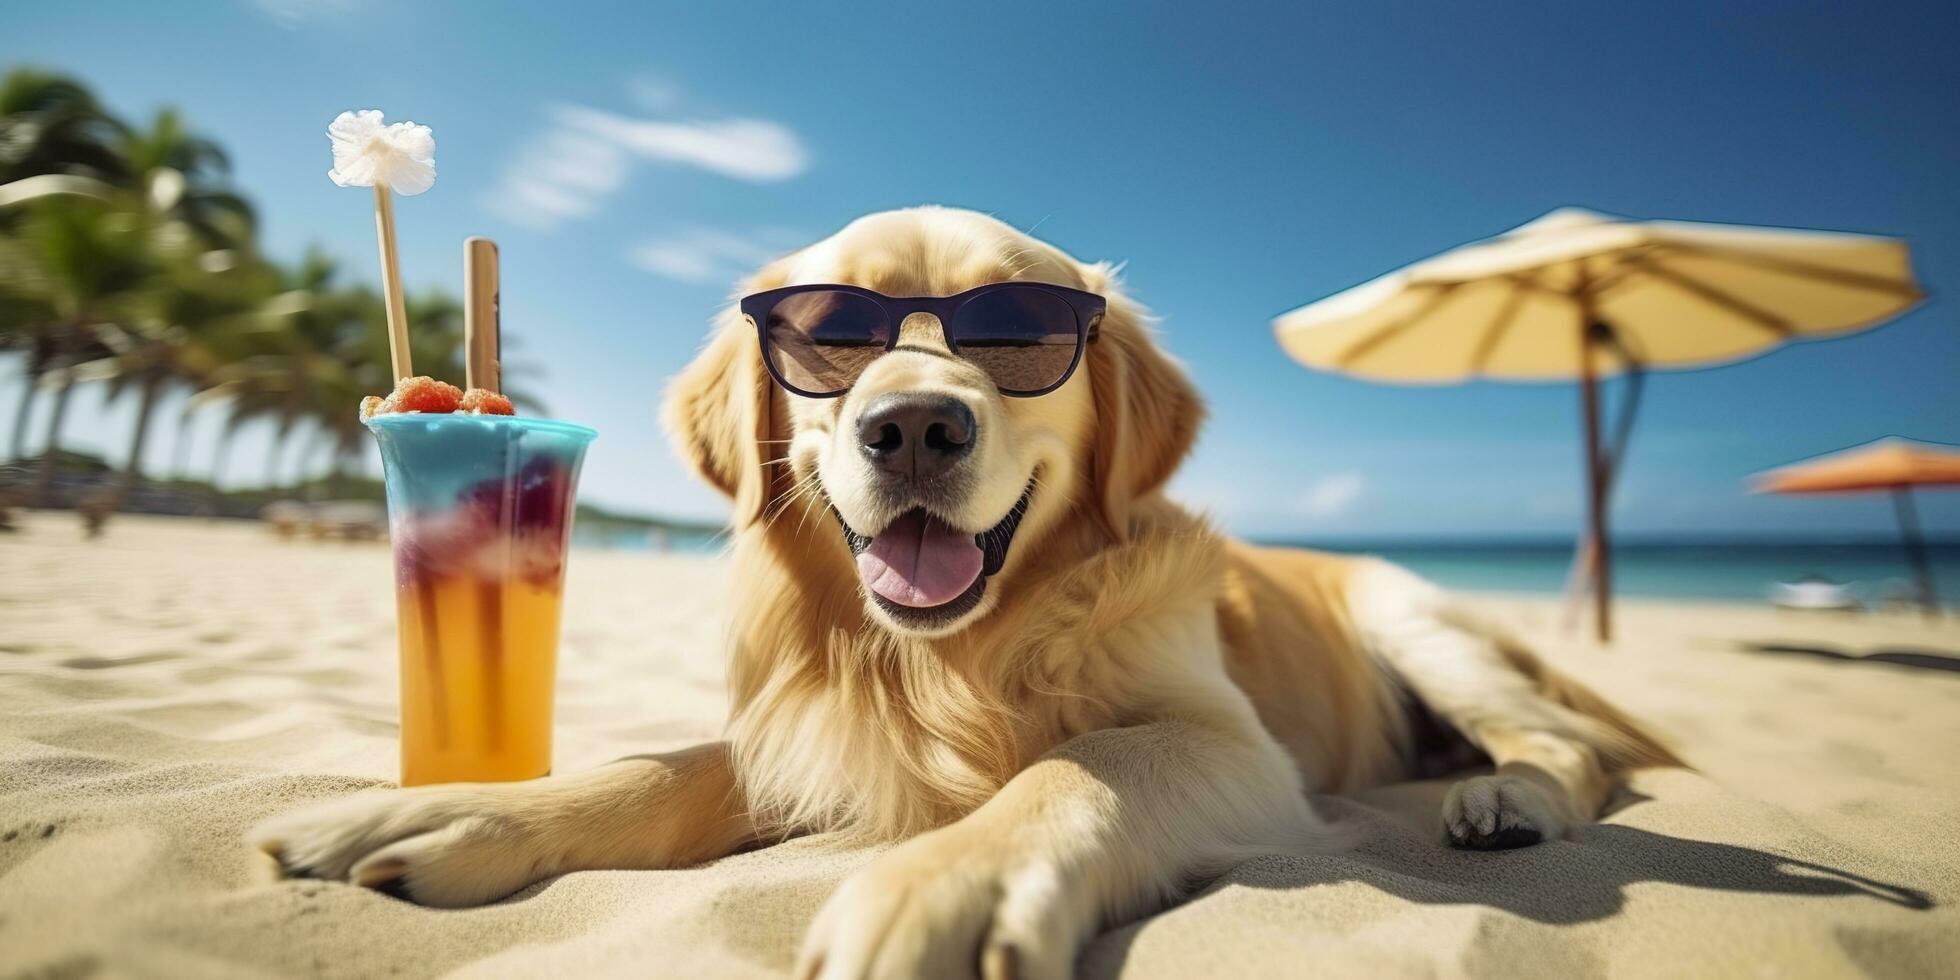 Keeping Your Canine Cool: Essential Summer Safety Tips for Your Dog